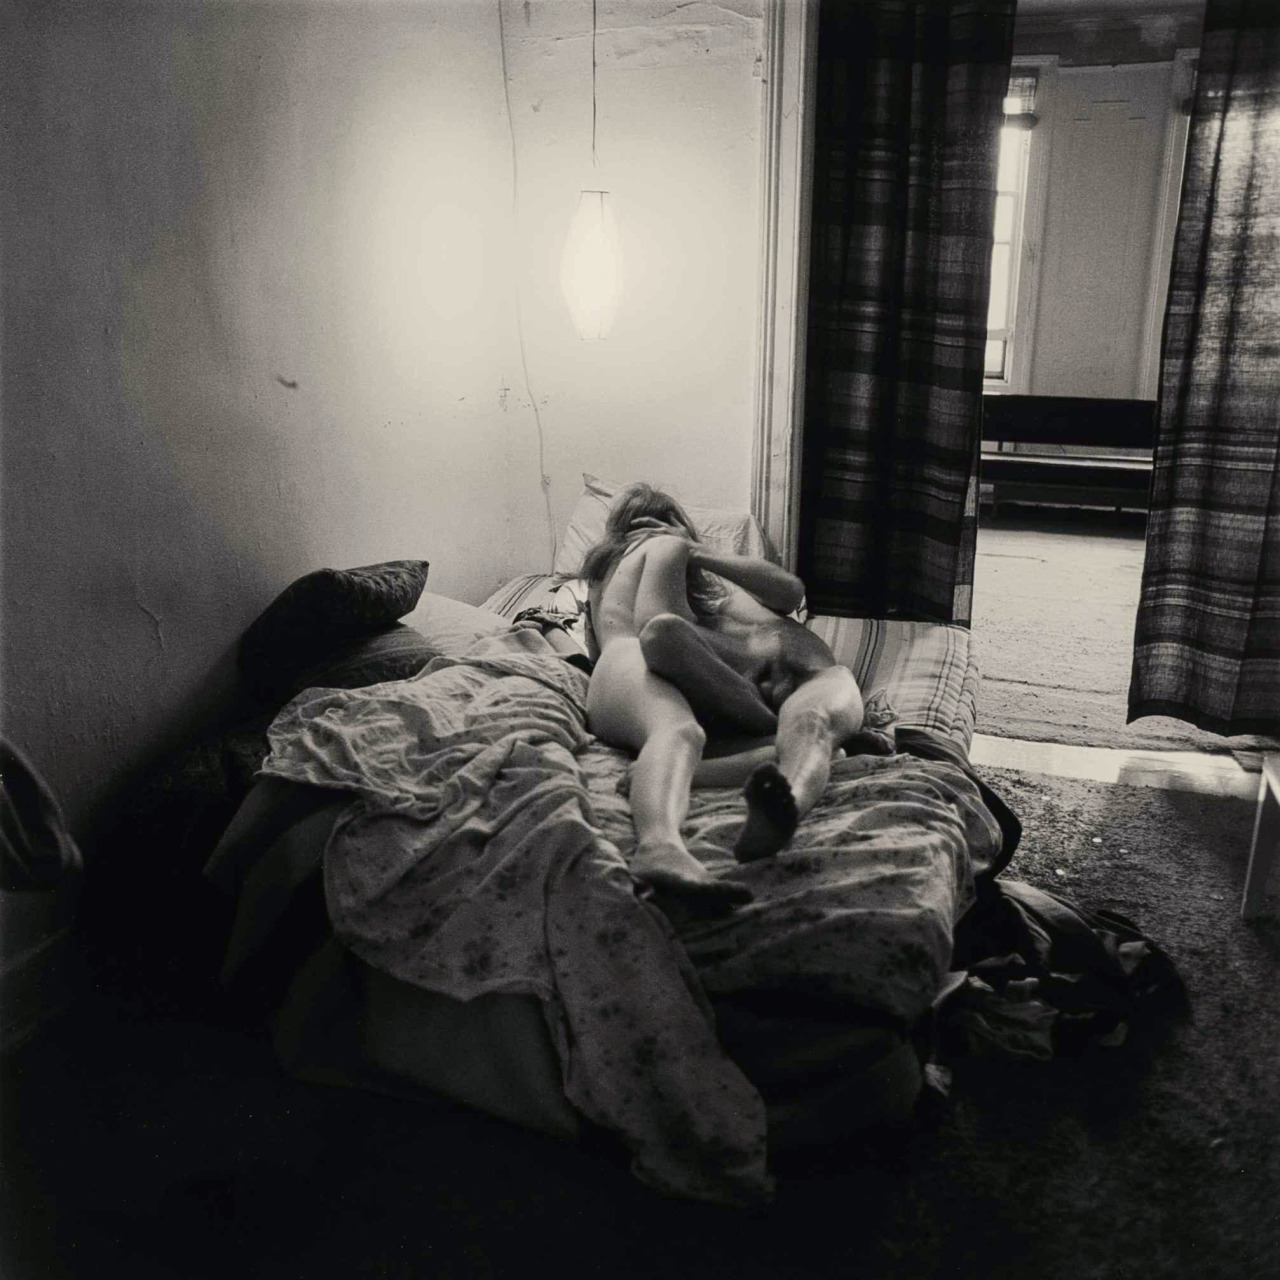 sulphuriclike:
“Diane Arbus_Couple in Bed Under a Paper Lantern, NYC 1966
”